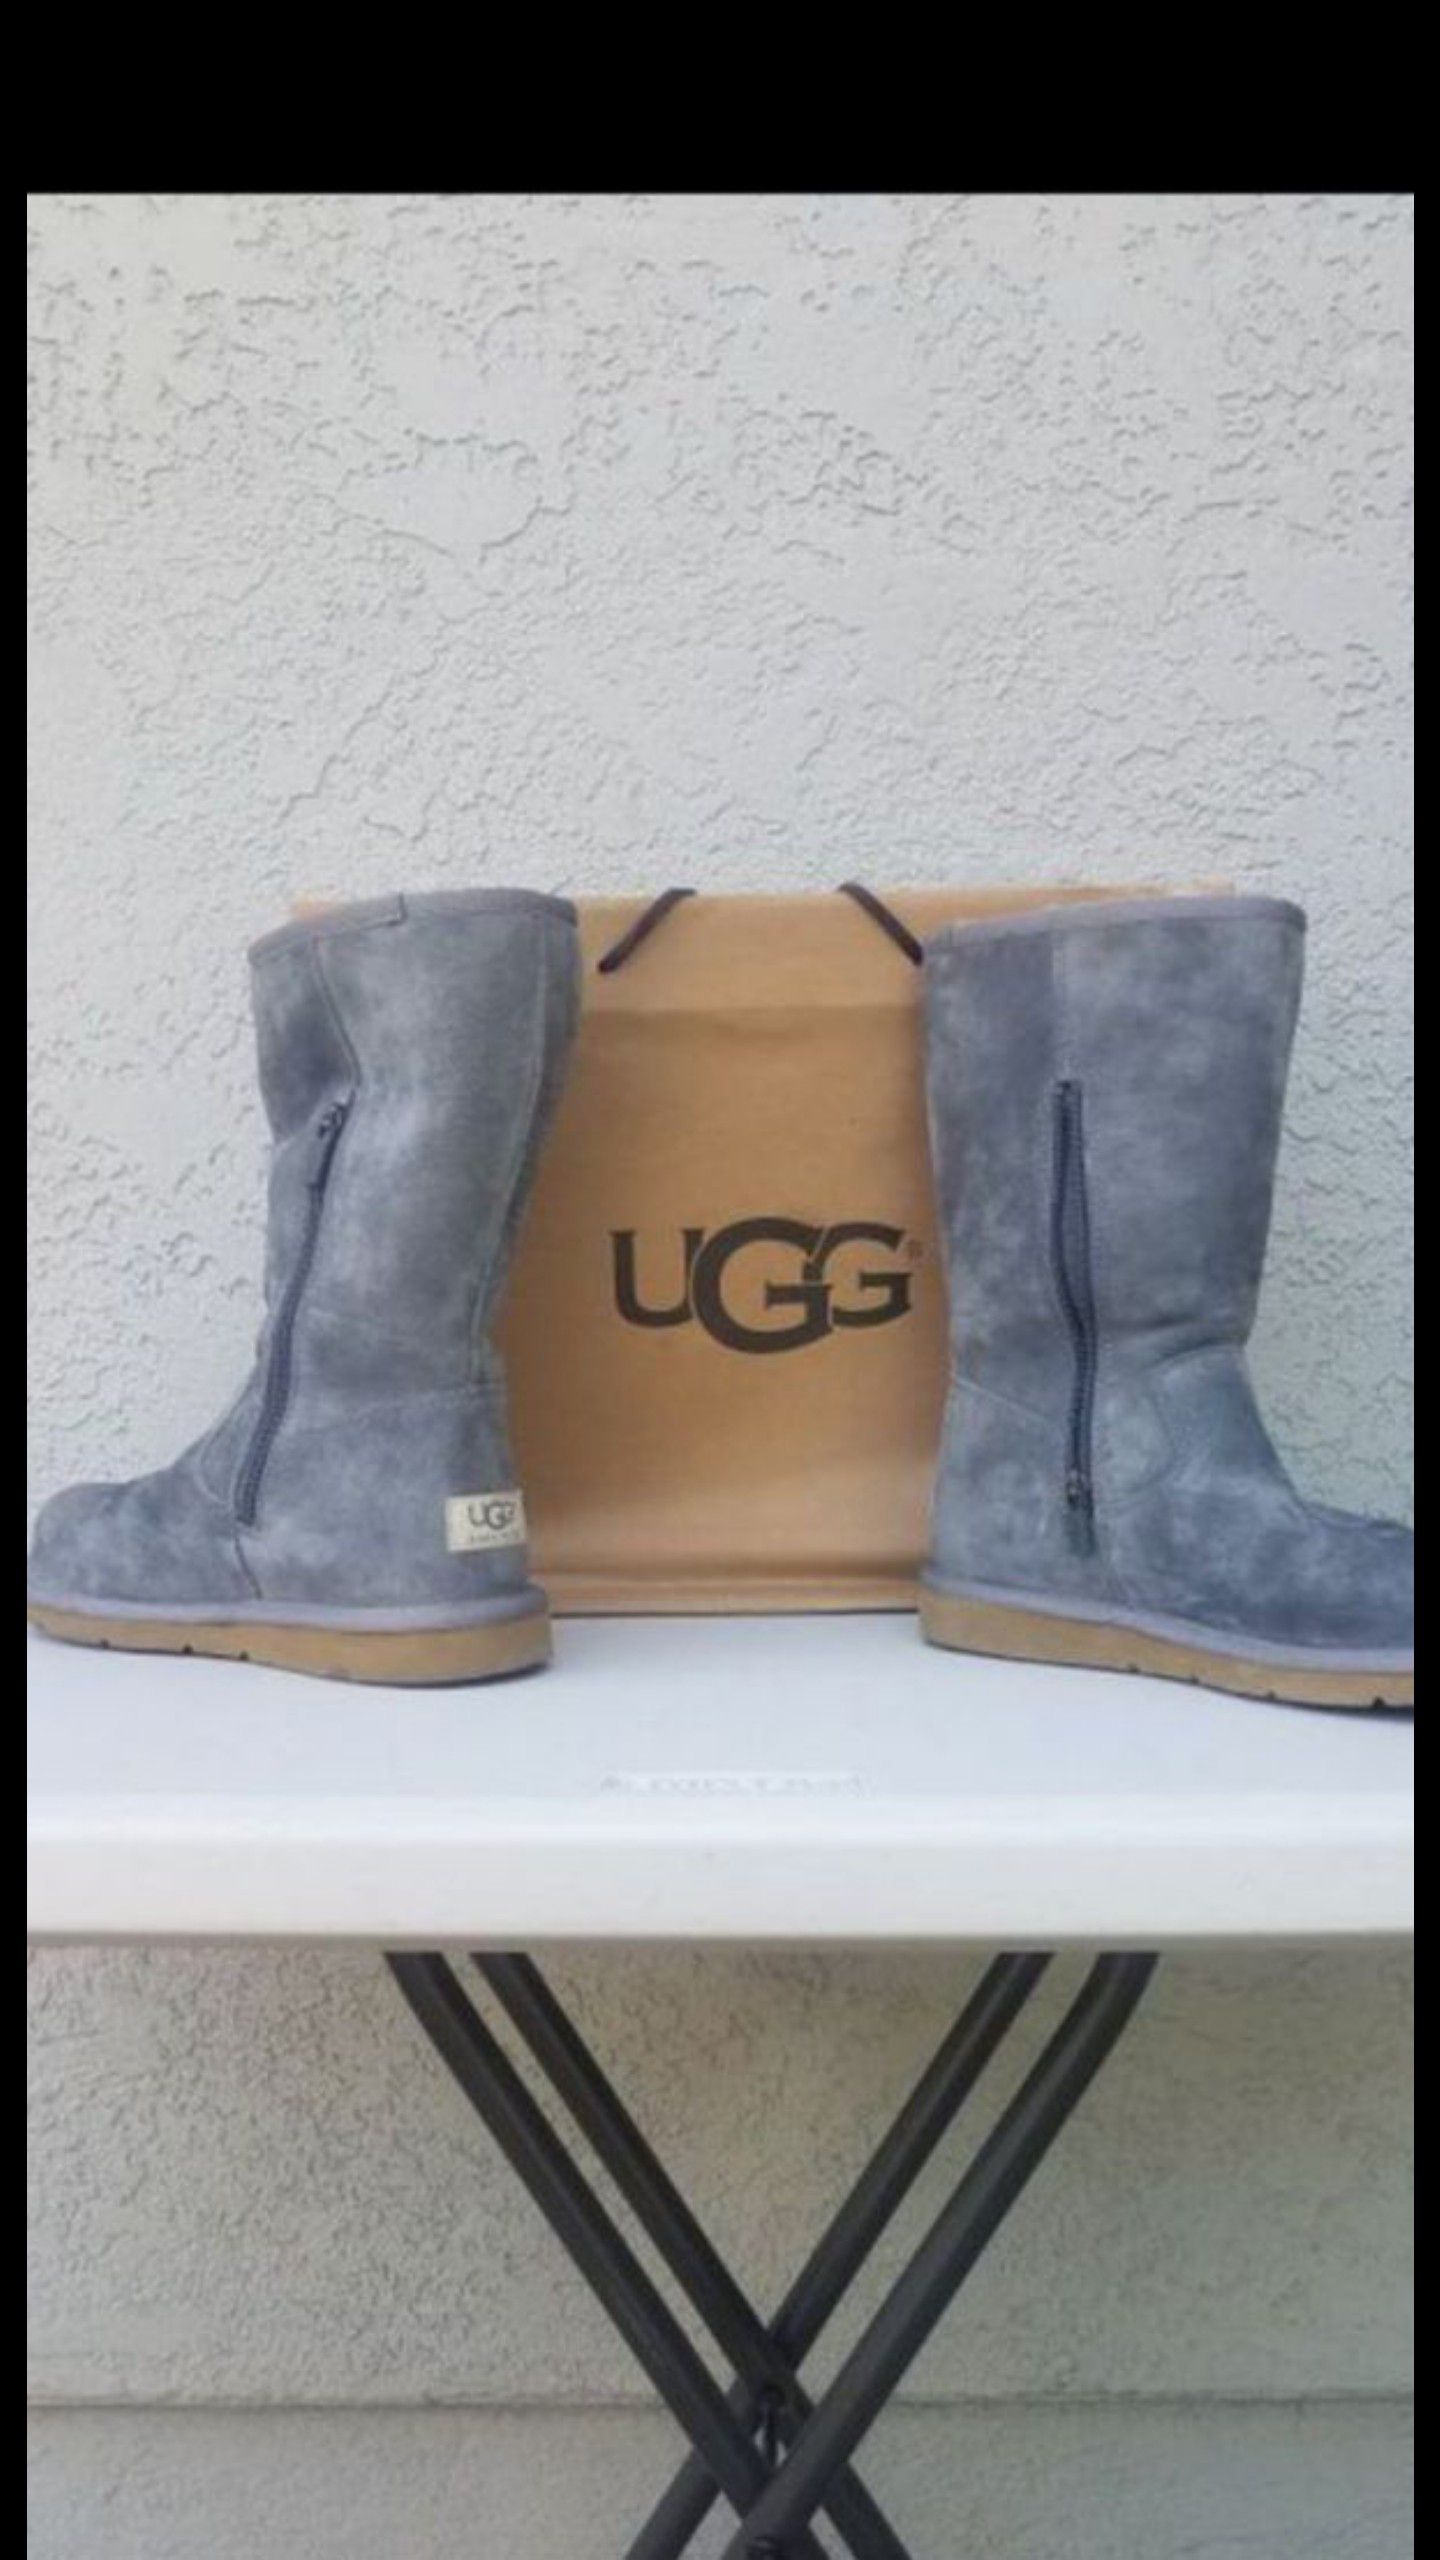 New UGG Boots size 7